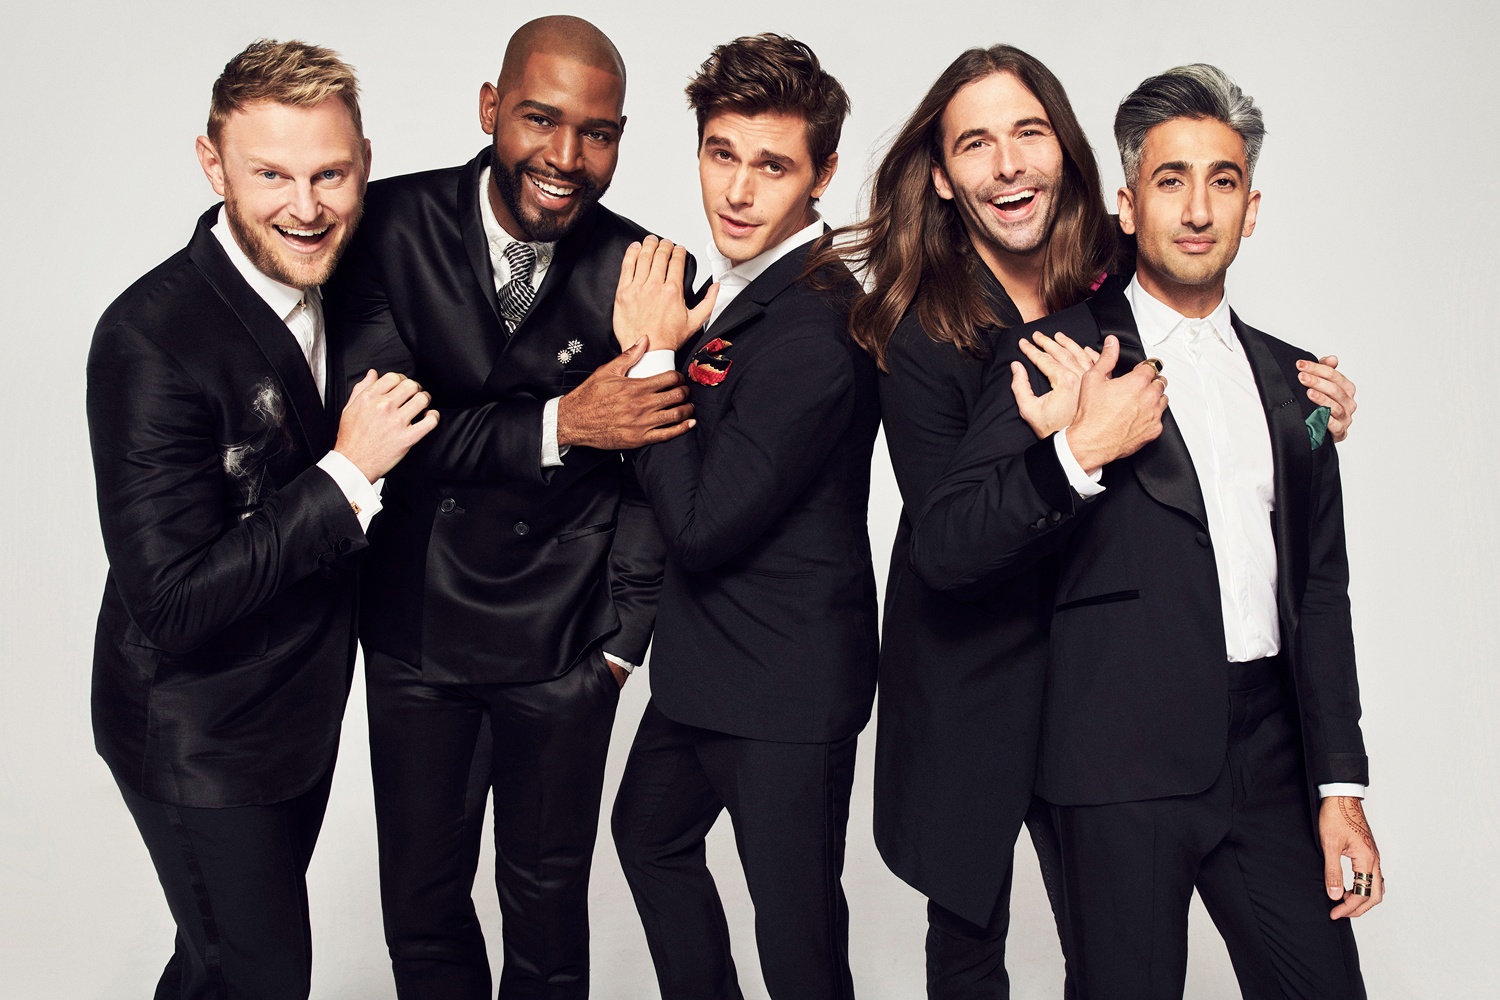 “Why Queer Eye is the perfect antidote to toxic masculinity”